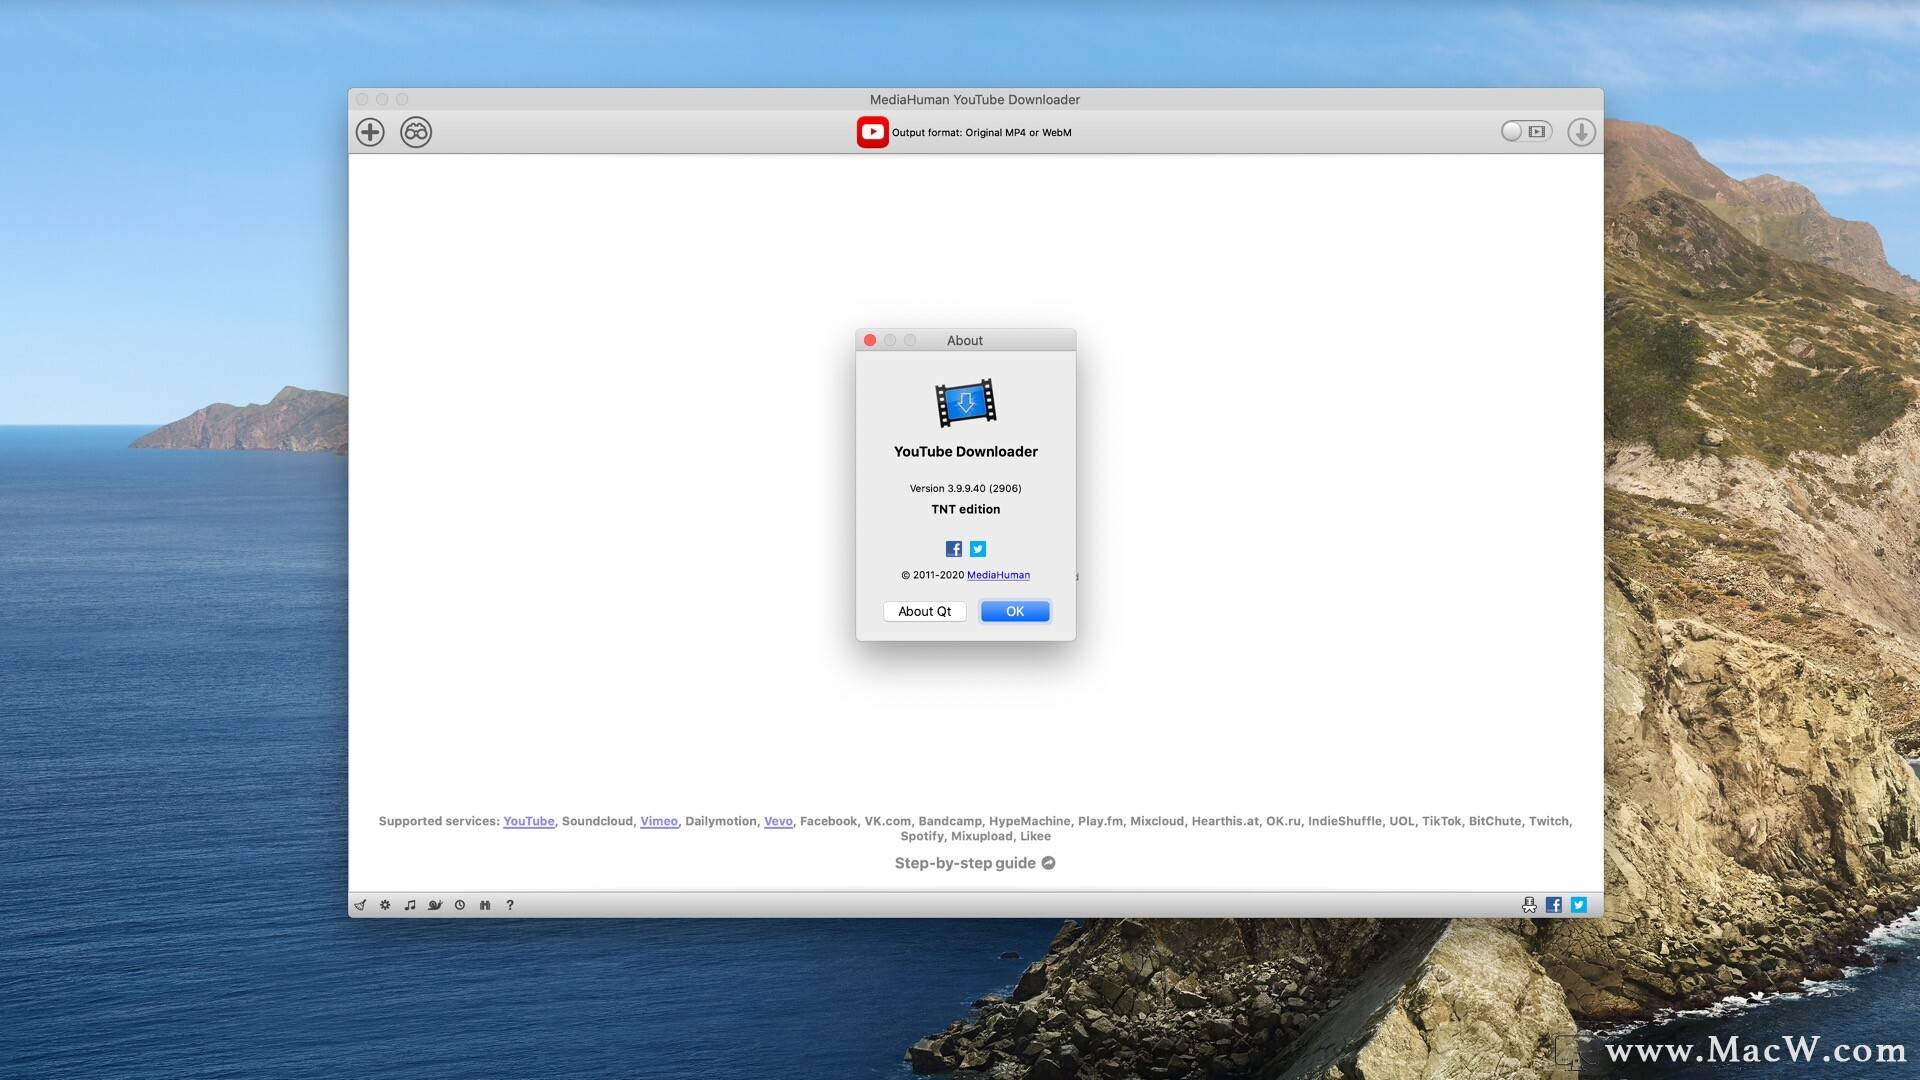 instal the new version for mac MediaHuman YouTube Downloader 3.9.9.83.2406